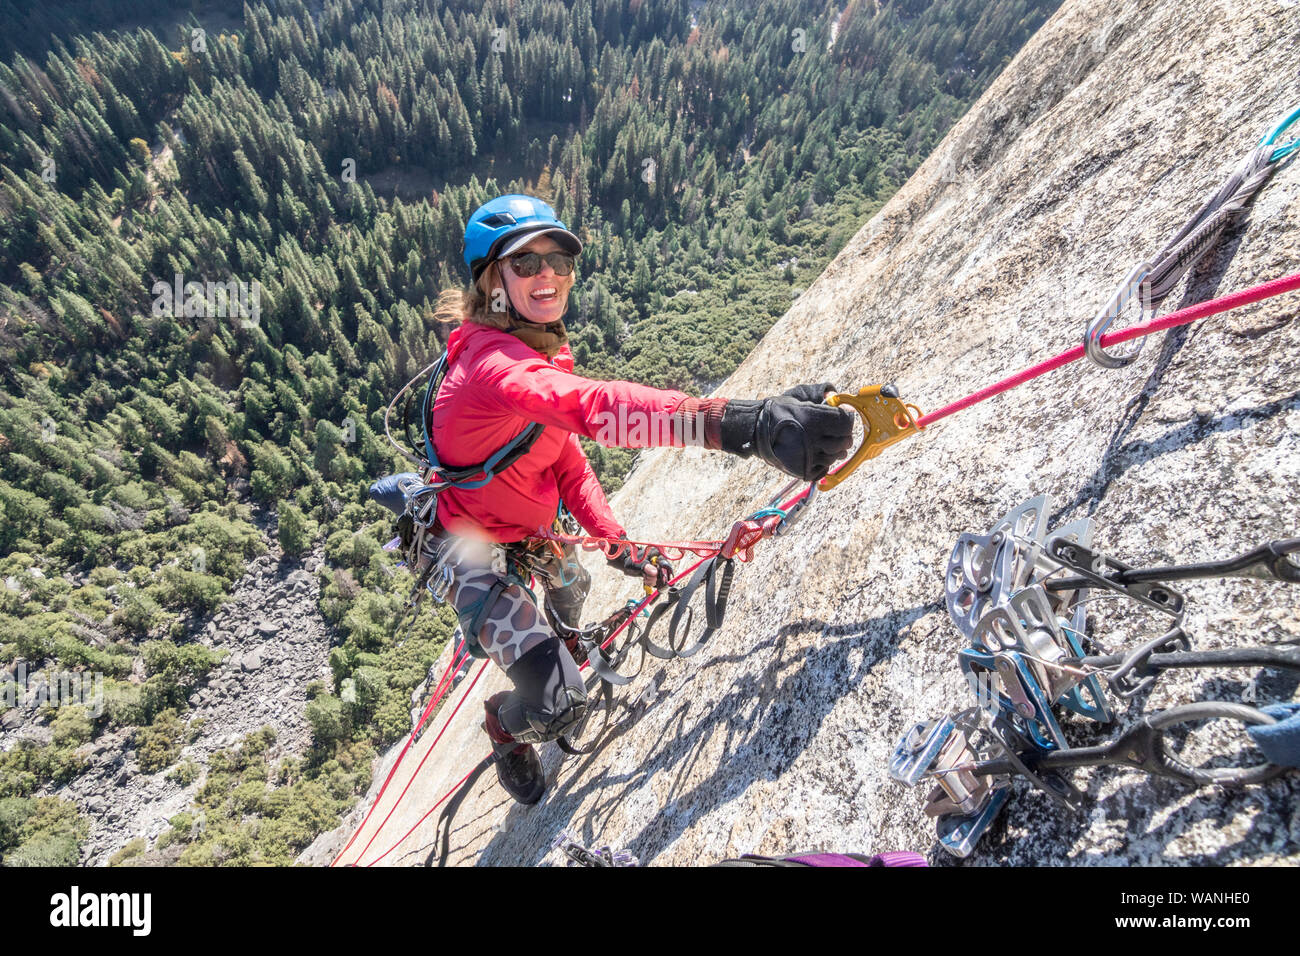 A young woman is all smiles while jumaring on a fixed rope way high up Stock Photo